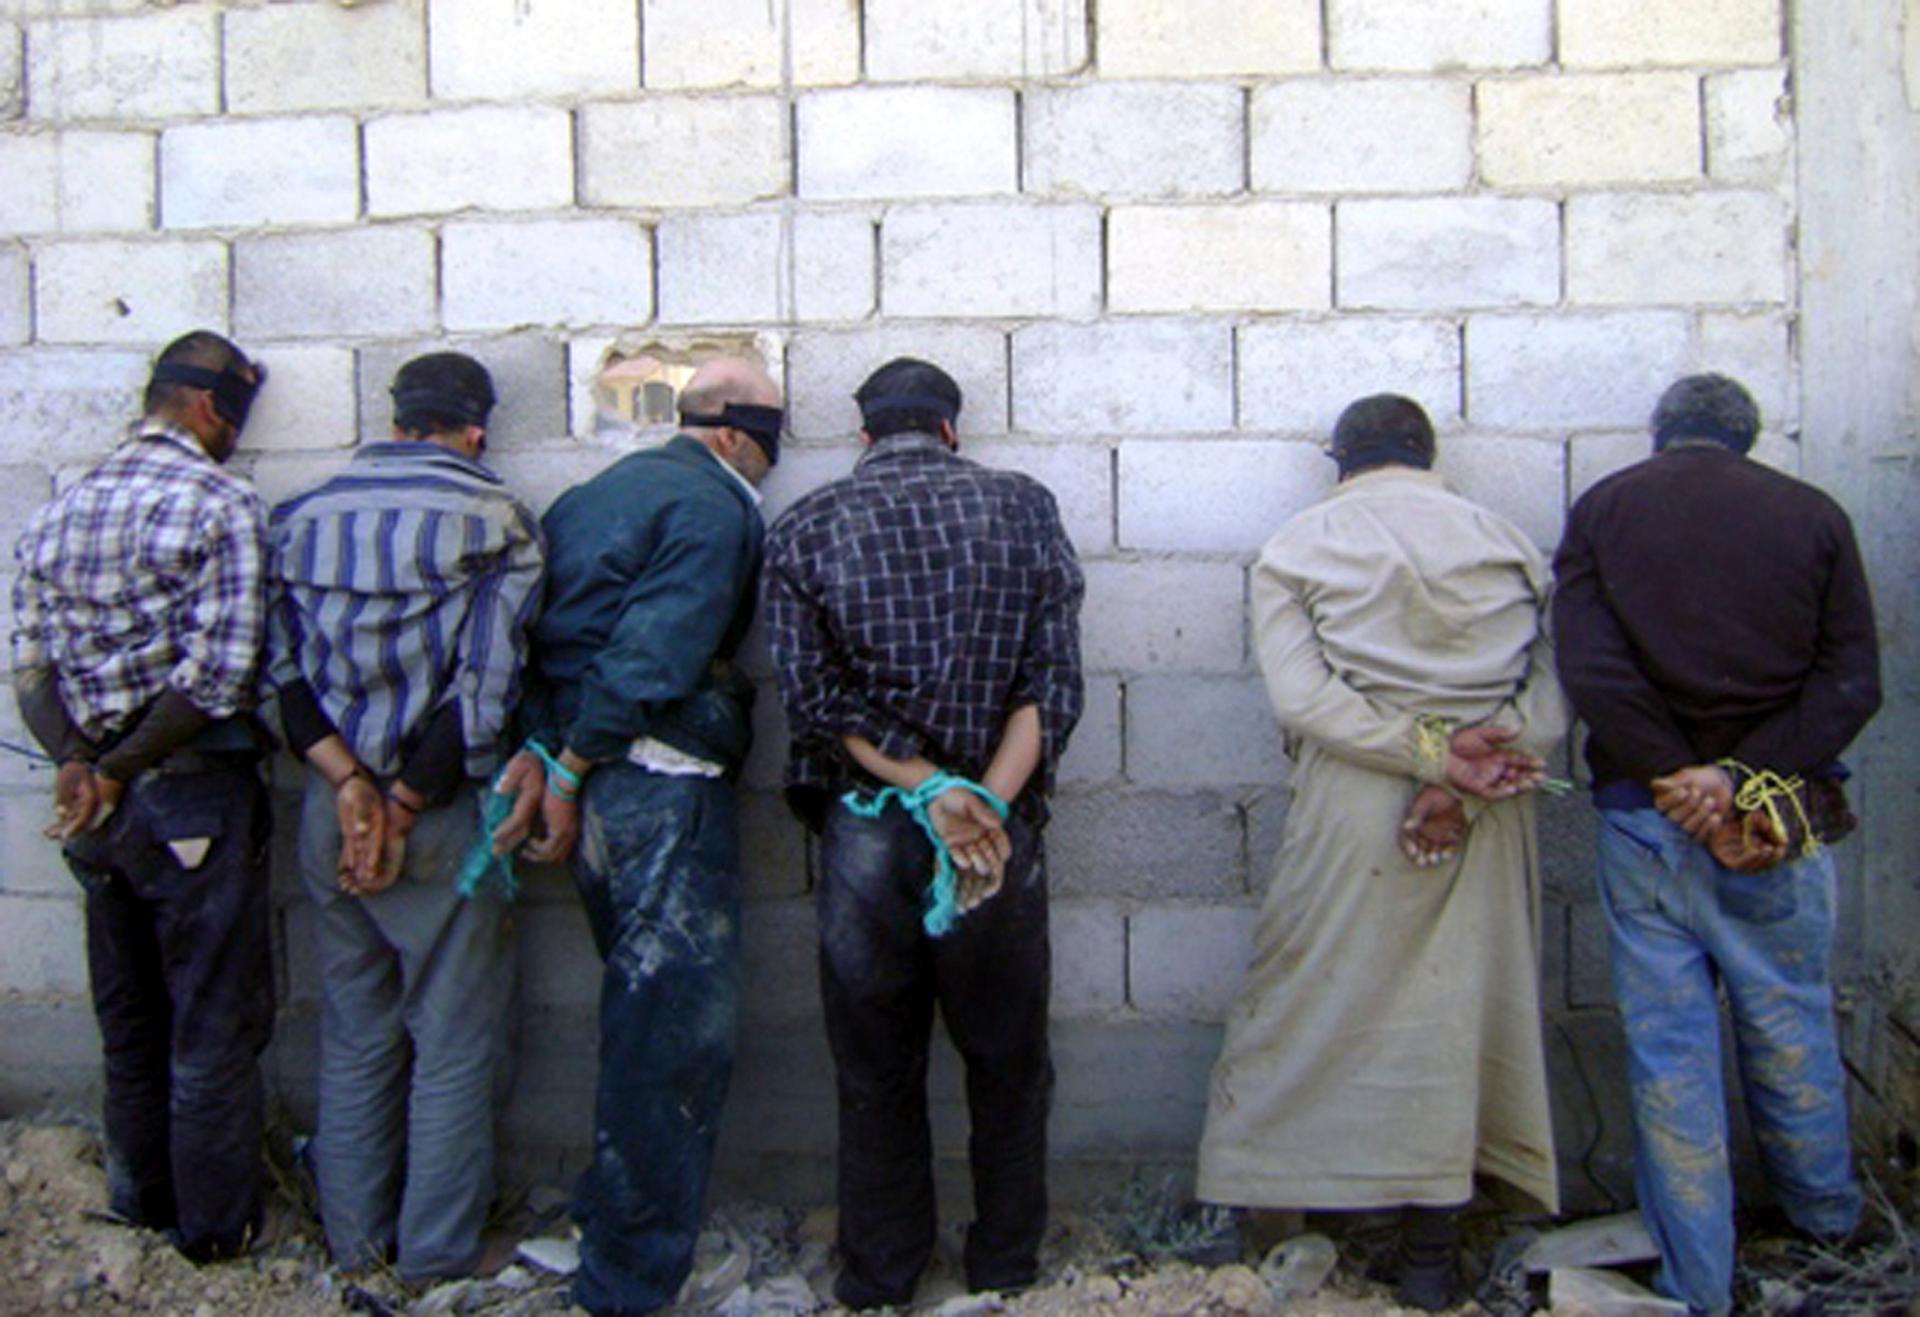 A handout photograph distributed by Syria's national news agency SANA shows detained men, blindfolded and handcuffed.